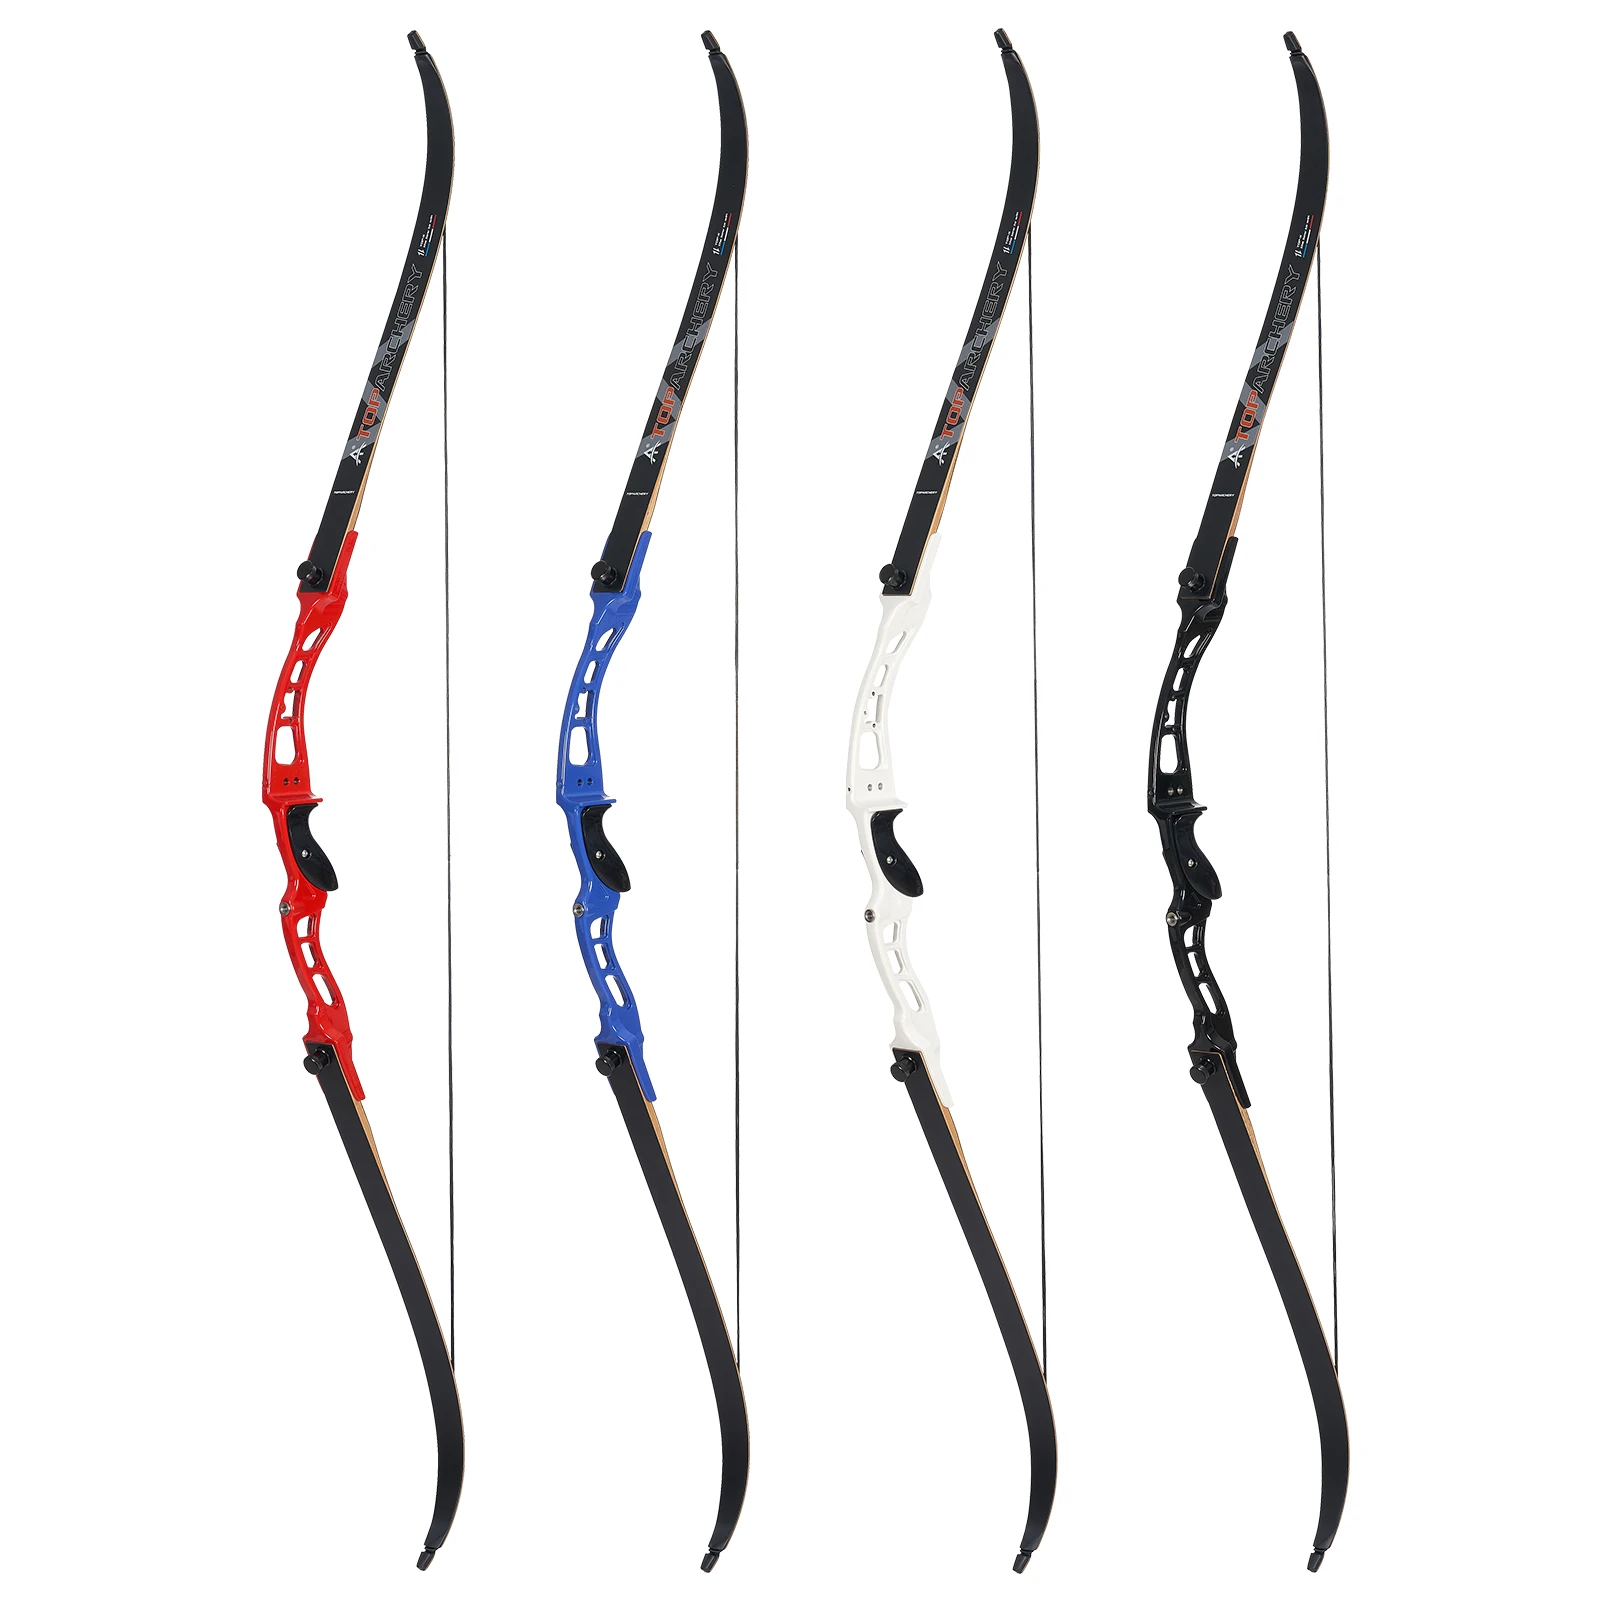 

66" Archery Takedown Recurve Bow Competition Target Shooting Aluminum Riser Laminated Limbs for Right Hand Hunting Accessories